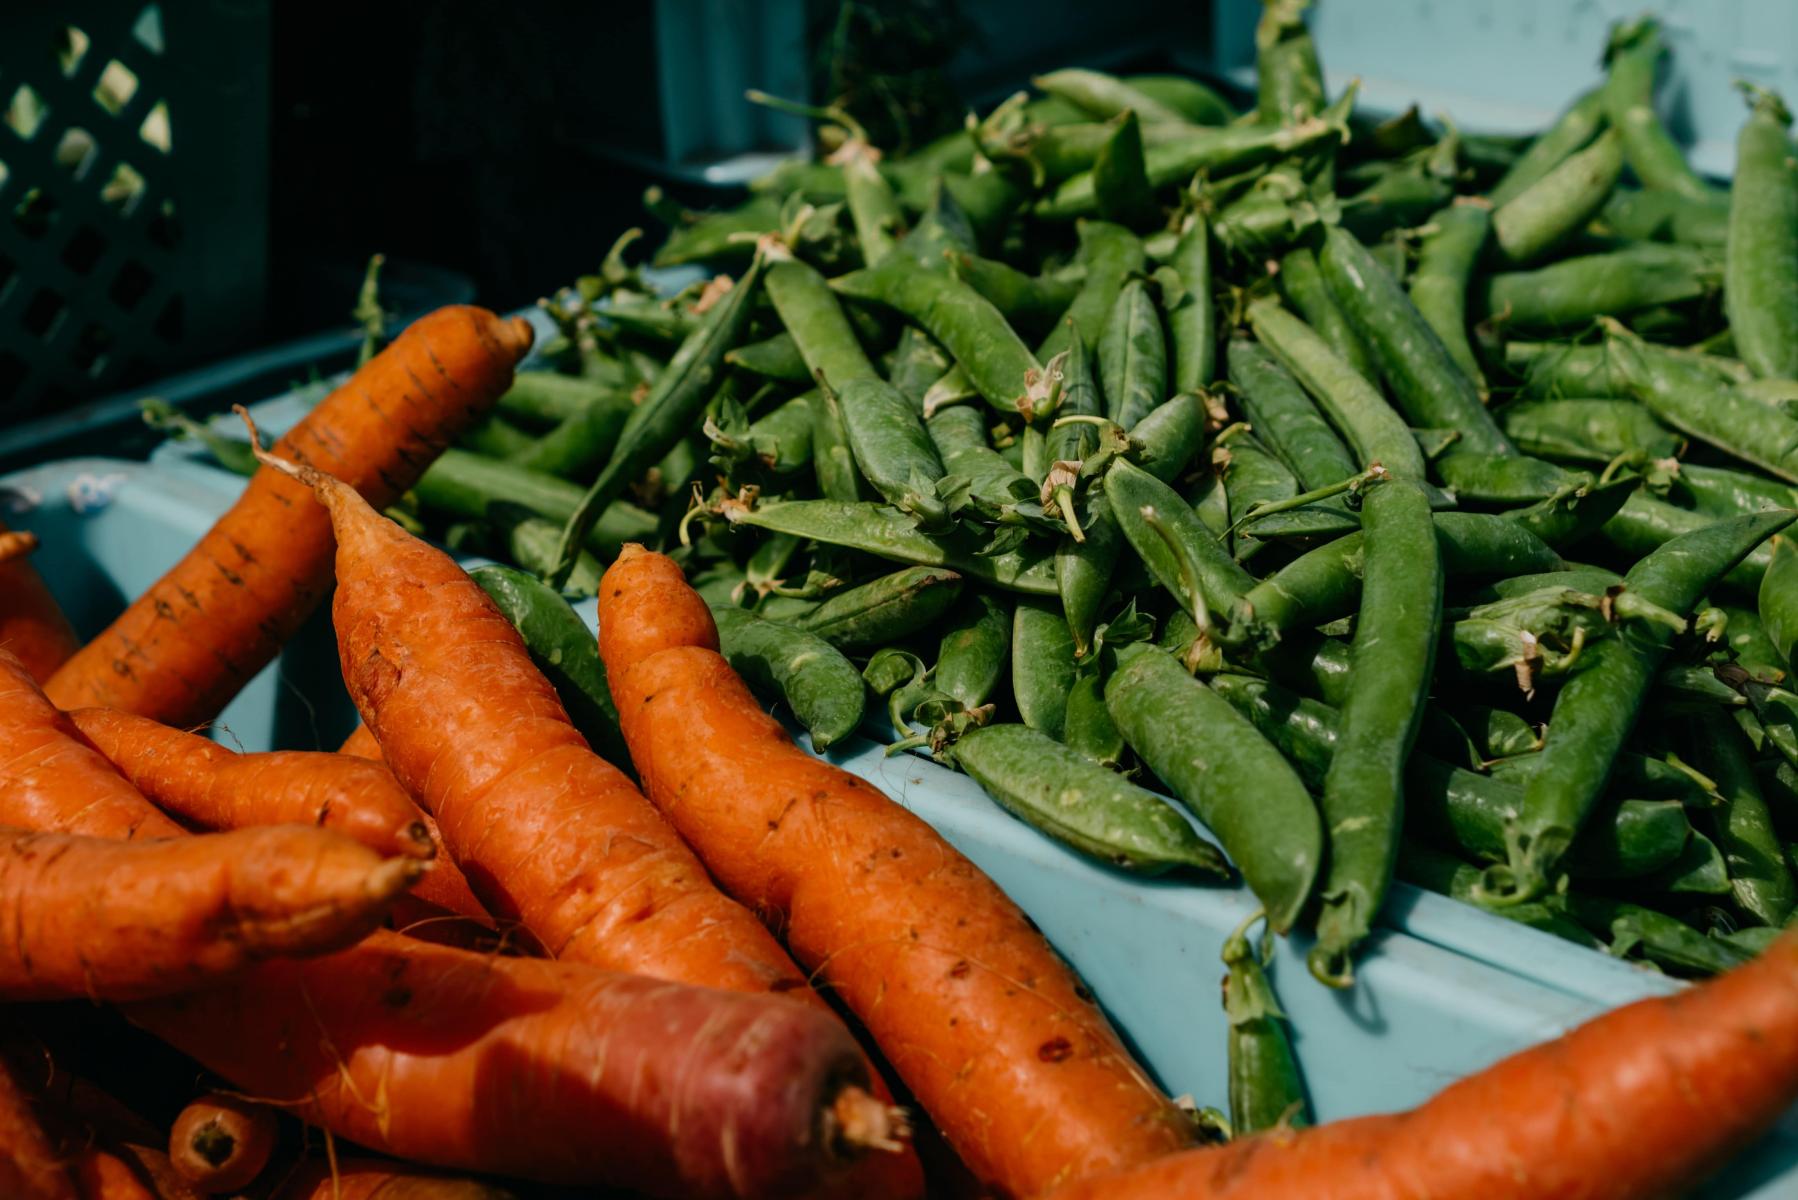 Carrots and pea pods on a table